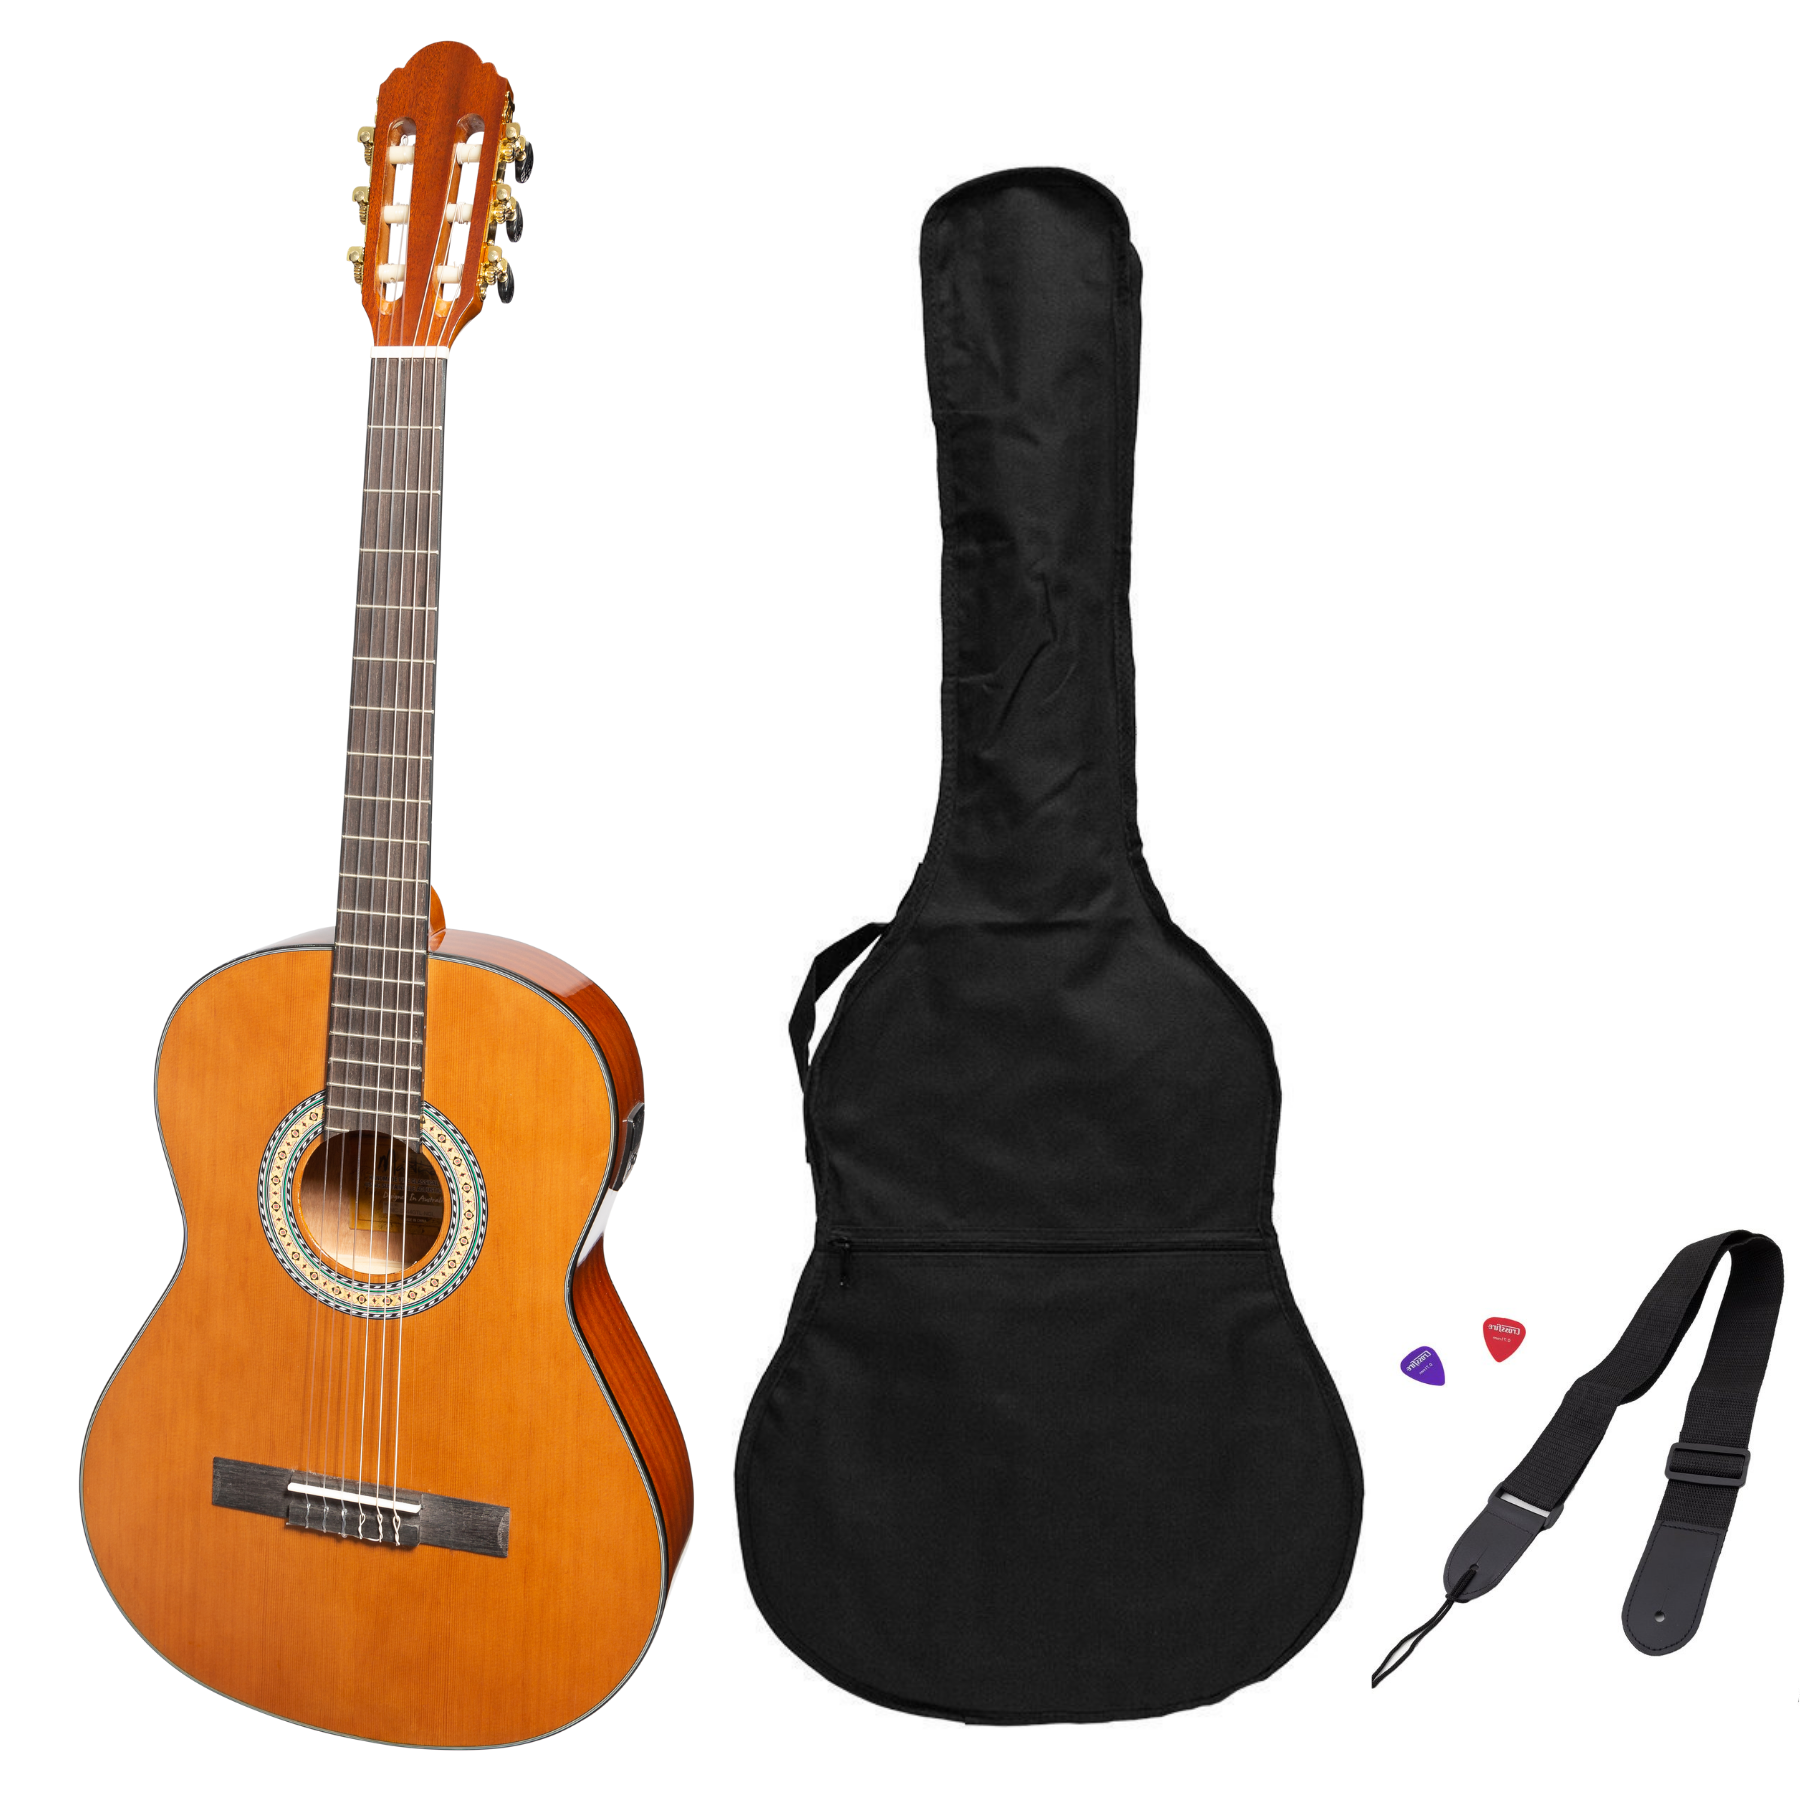 Martinez G-Series Left Handed Full Size Student Classical Guitar Pack with Built In Tuner (Natural-Gloss)-MP-44GTL-NGL